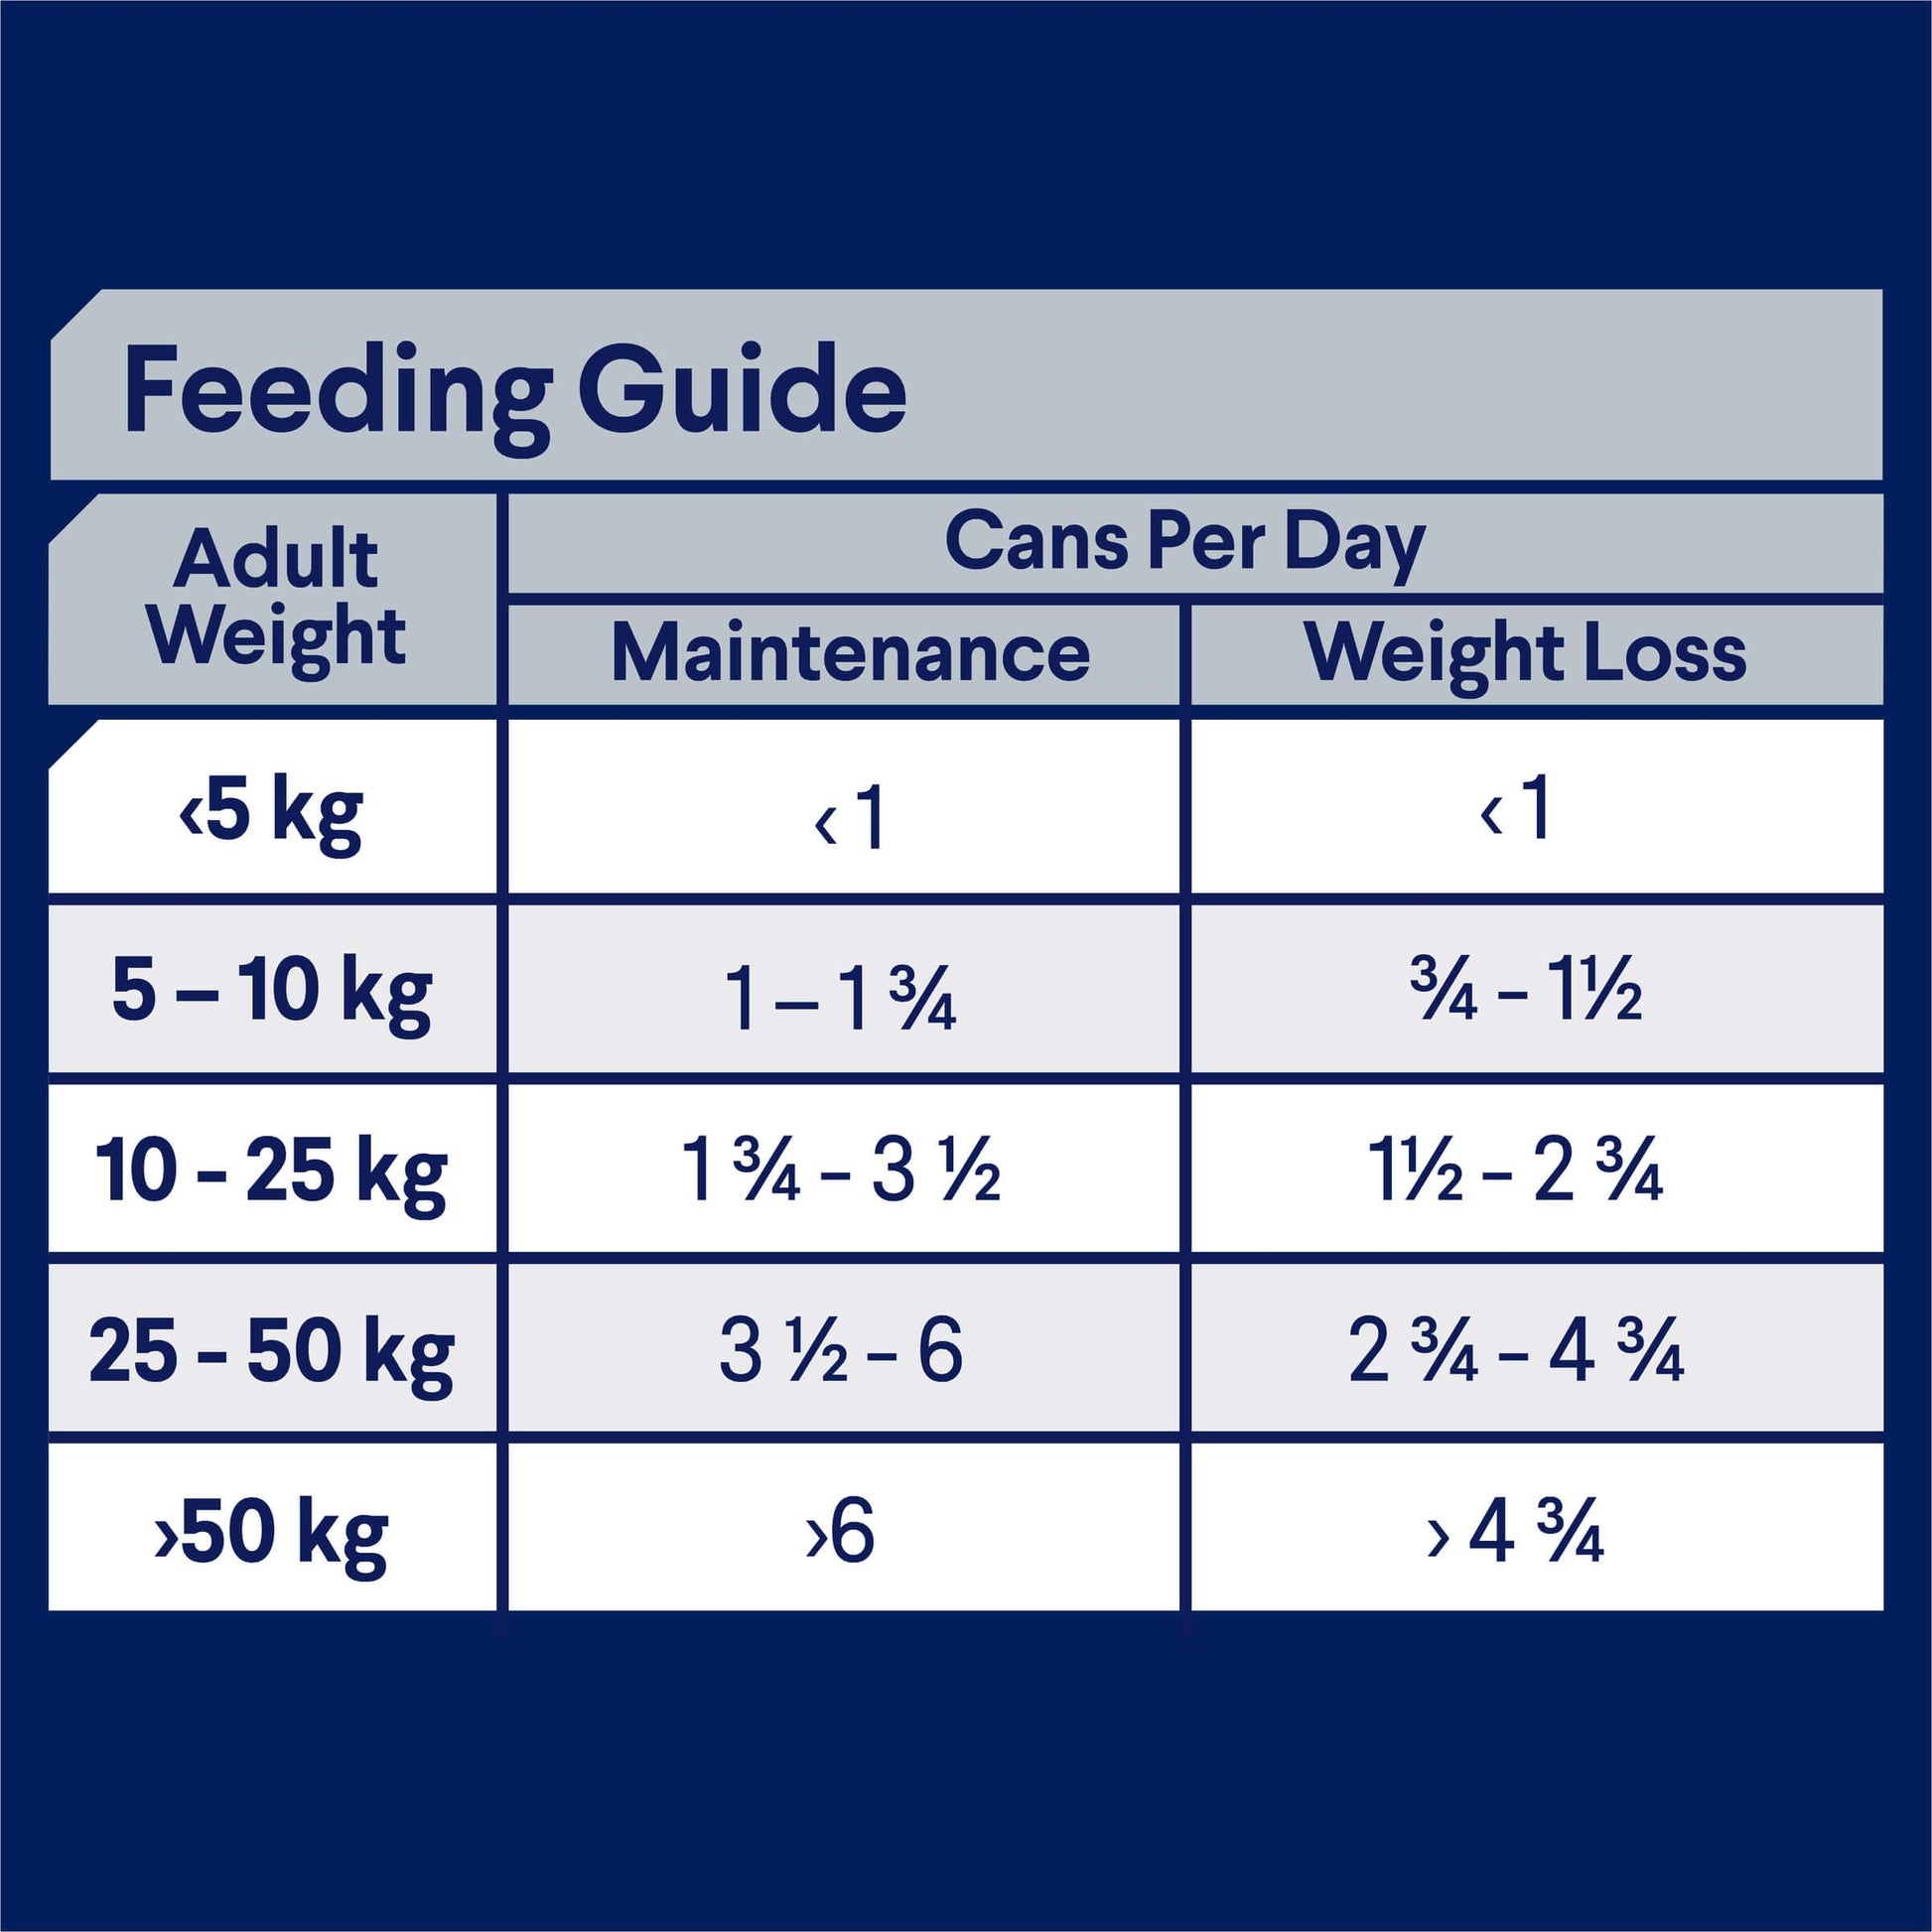 Advance Weight Control Adult Chicken Wet Dog Food (122711000070) [default_color]